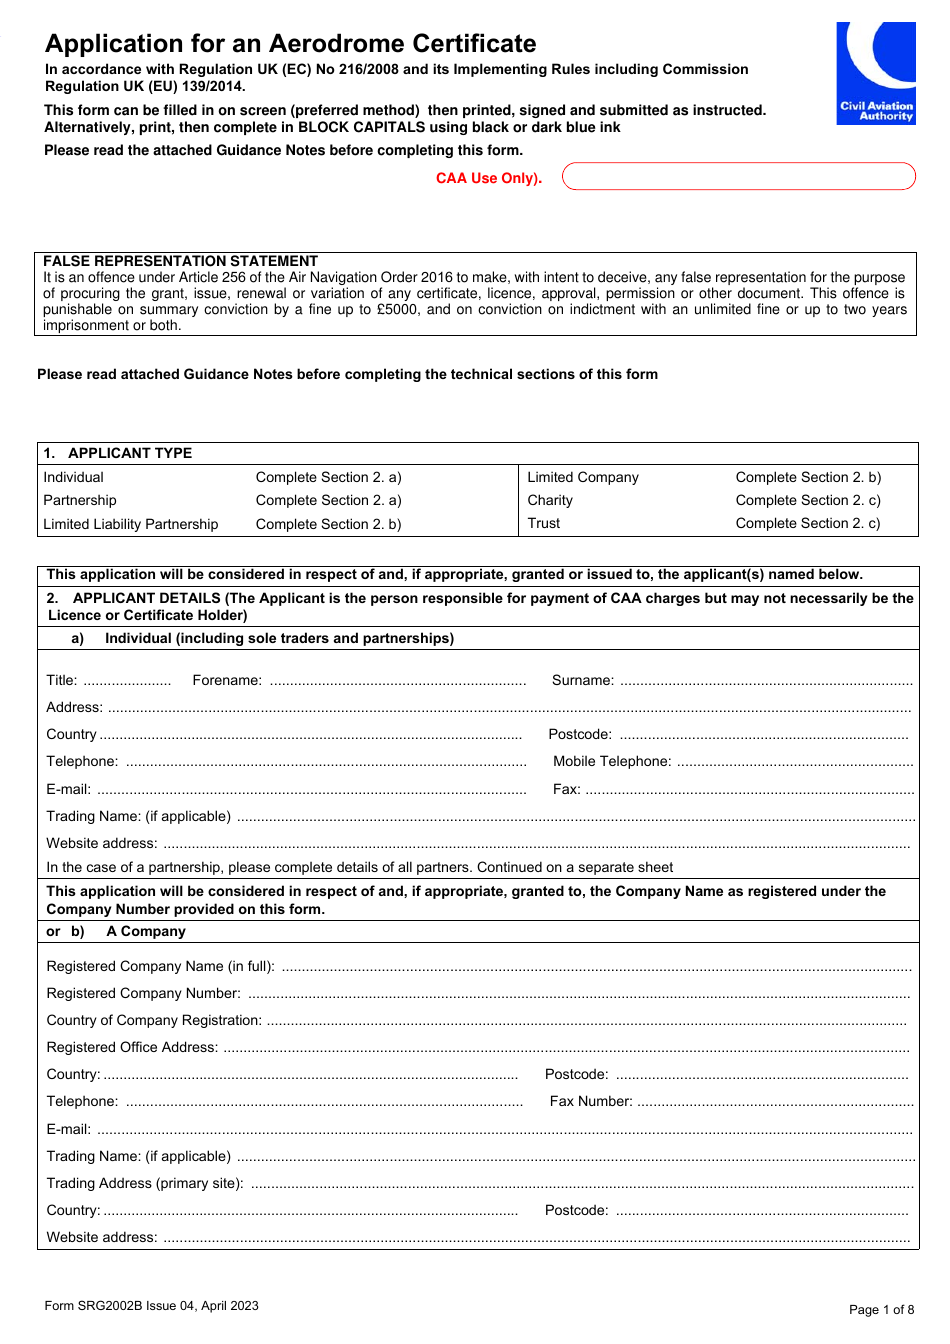 Form SRG2002B Application for an Aerodrome Certificate - United Kingdom, Page 1